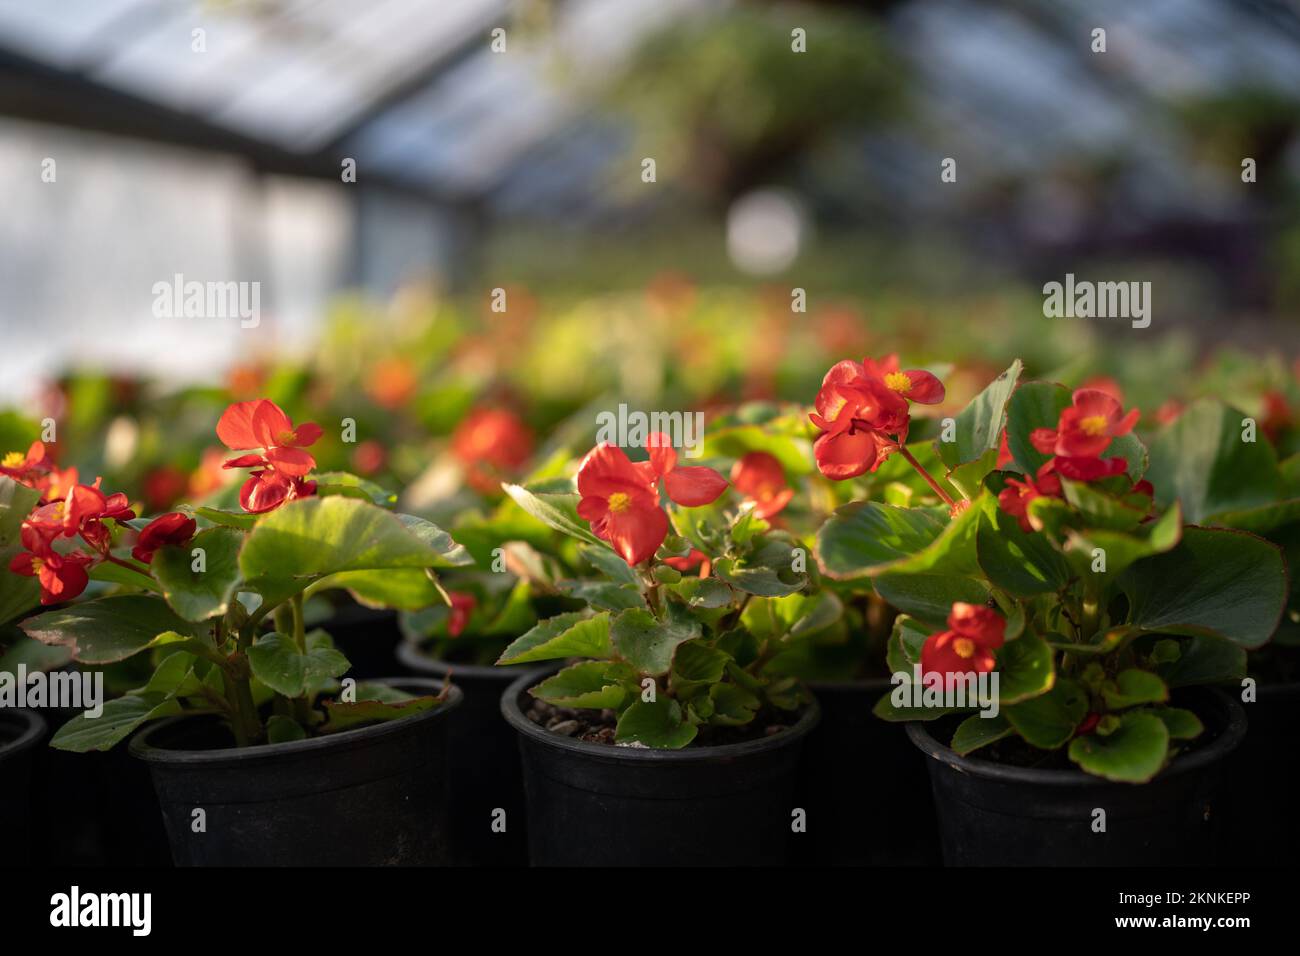 Green flowering begonia plants in dark pots with soil indoors in nurseries with glass roof and walls Stock Photo